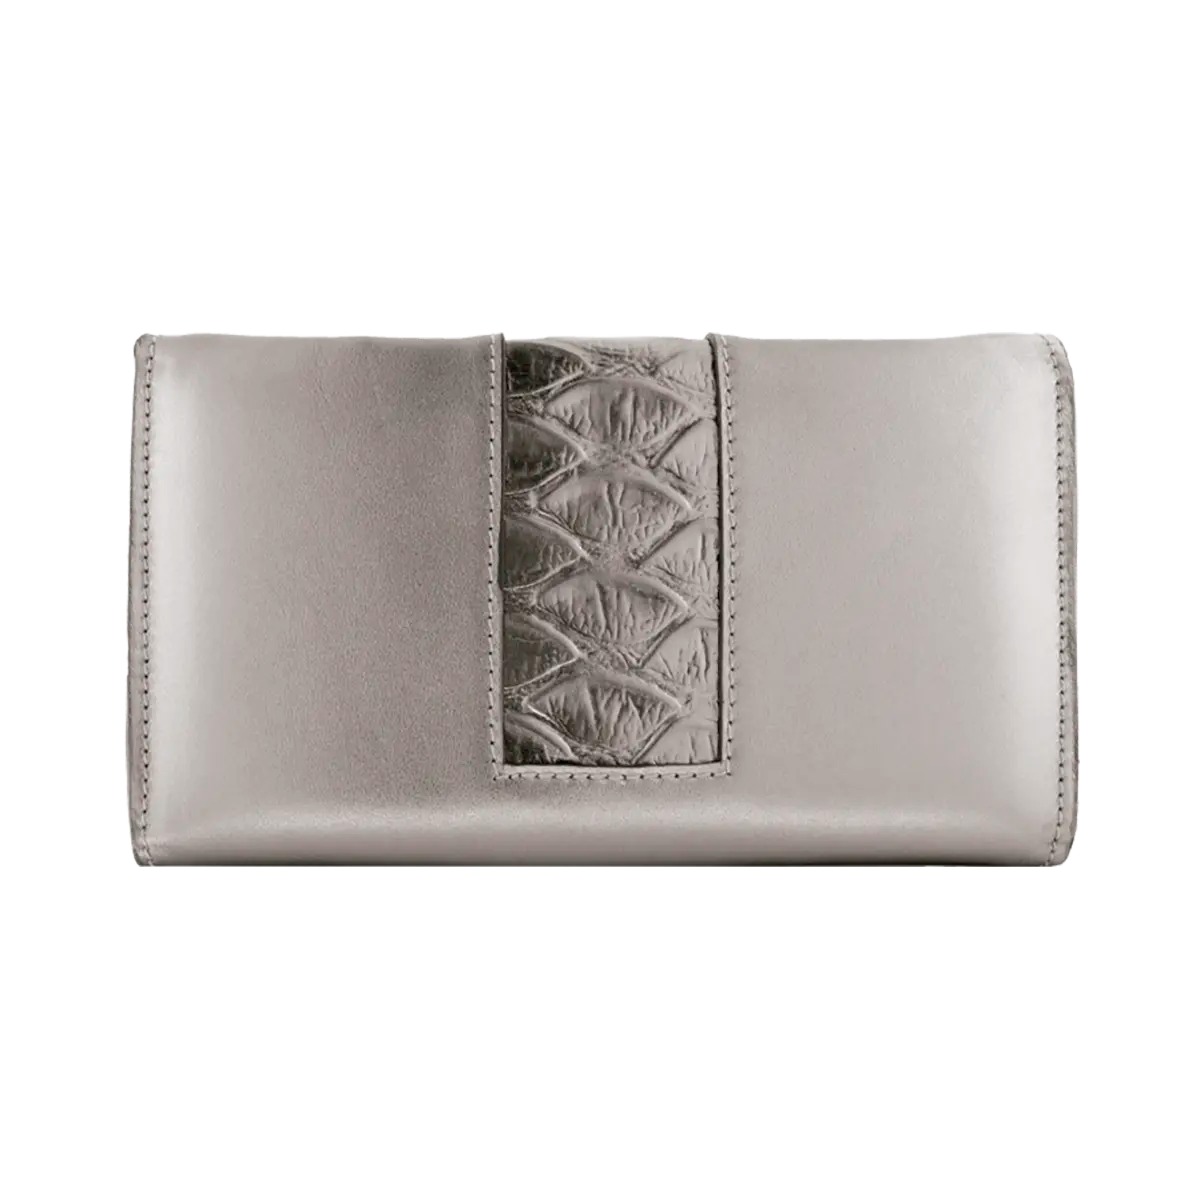 large silver leather wallet for women. Fashion accessories for women, shop in San Diego, CA.